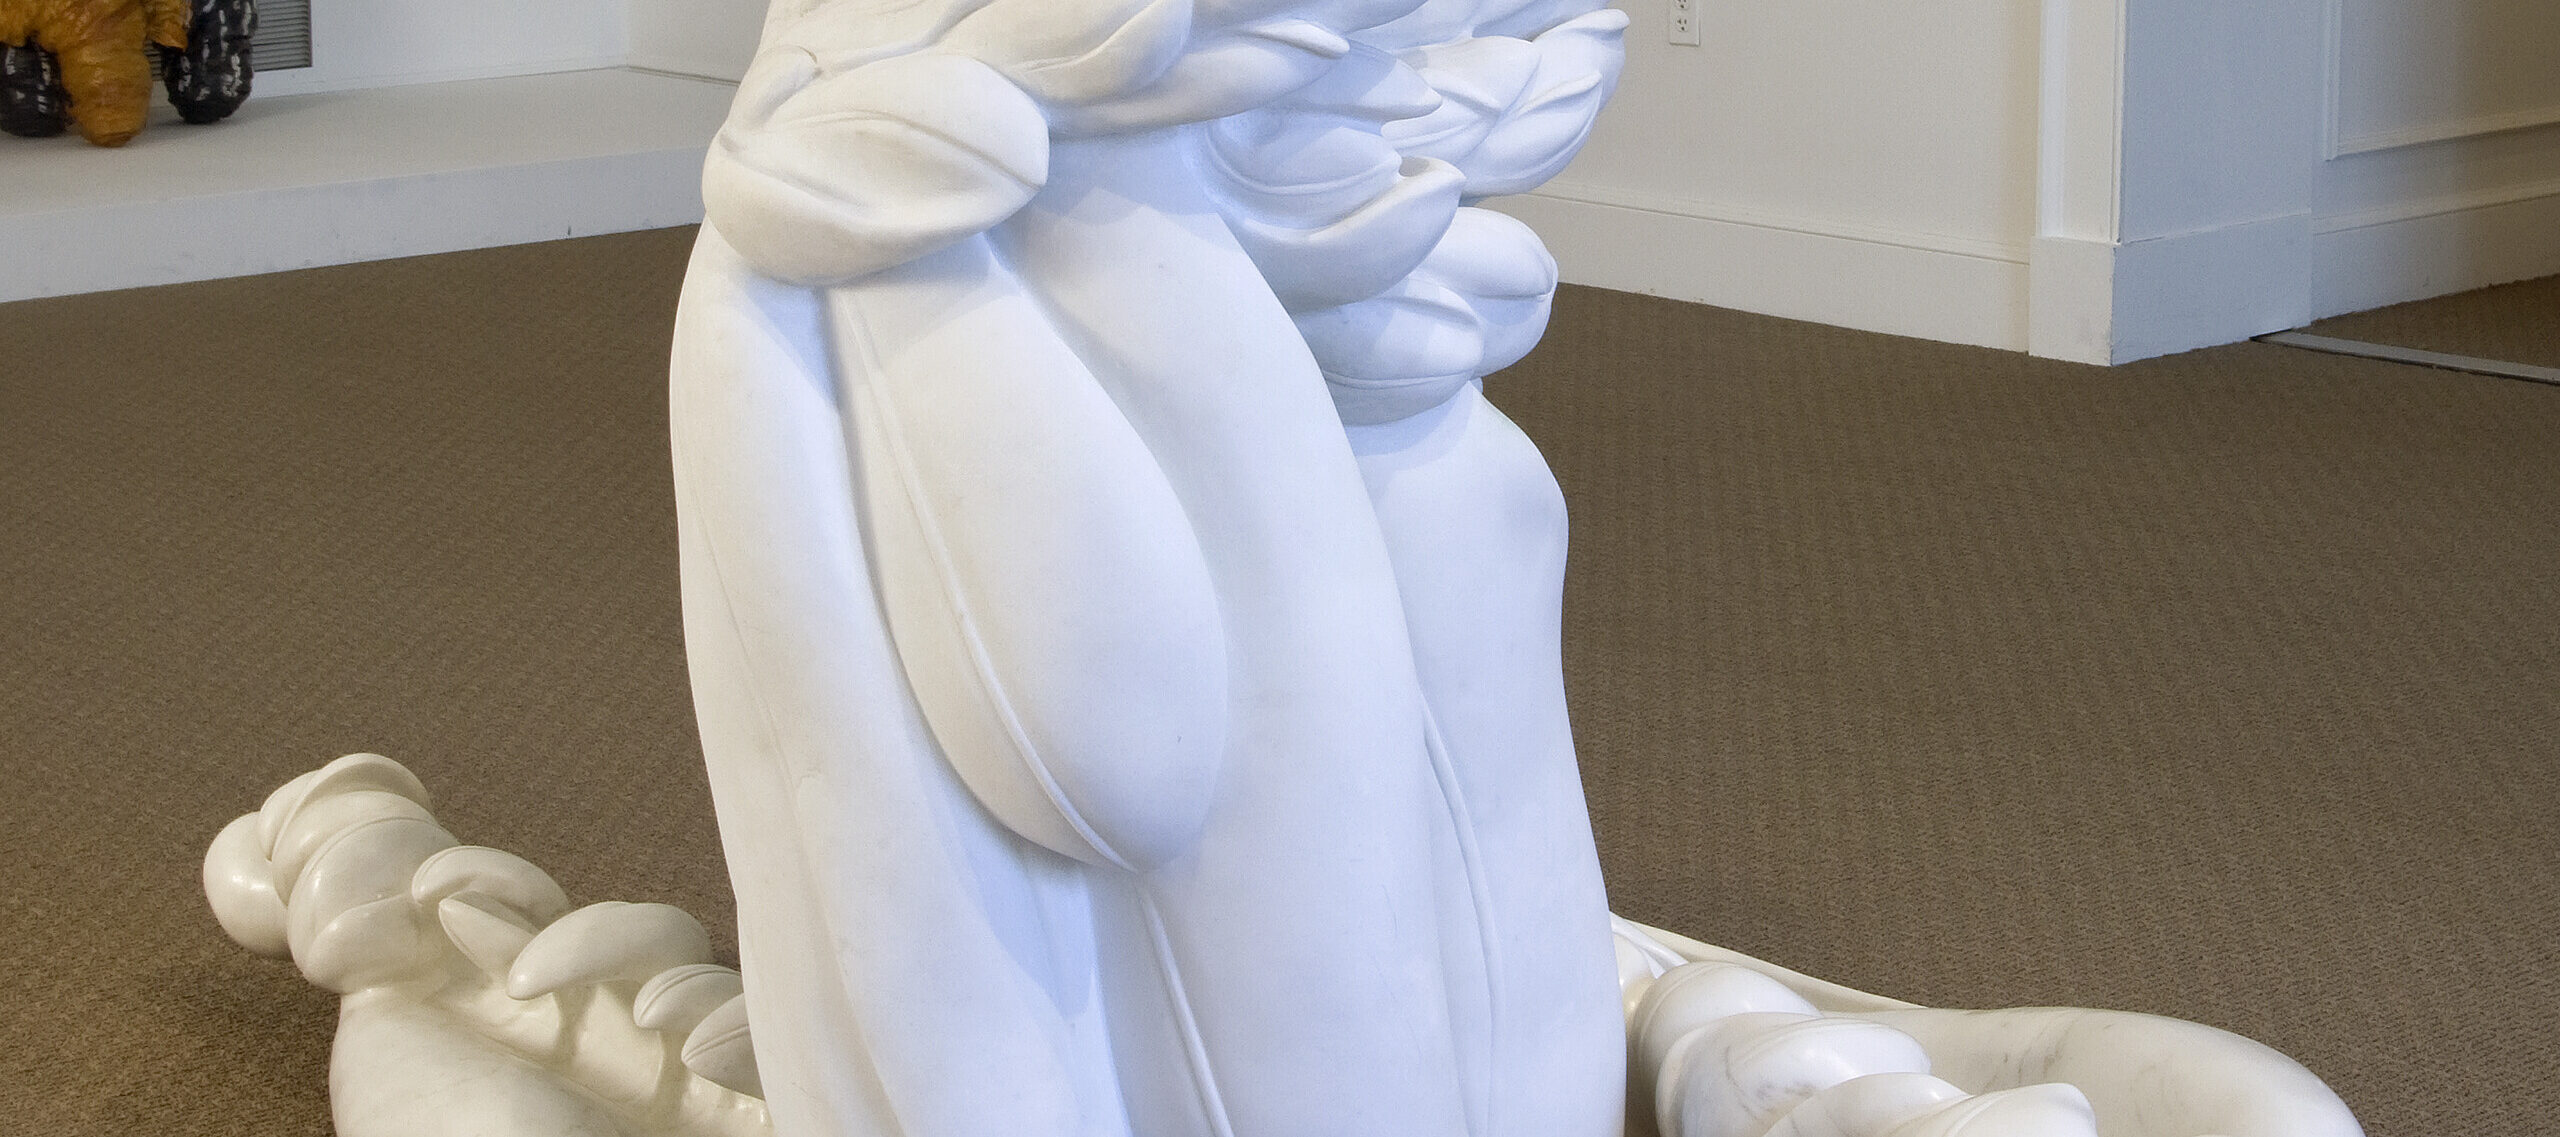 A photo of an abstract, white marble statue installed in a museum gallery. The sculpture appears to be a cluster of feathers with two large feathers resting on the ground.